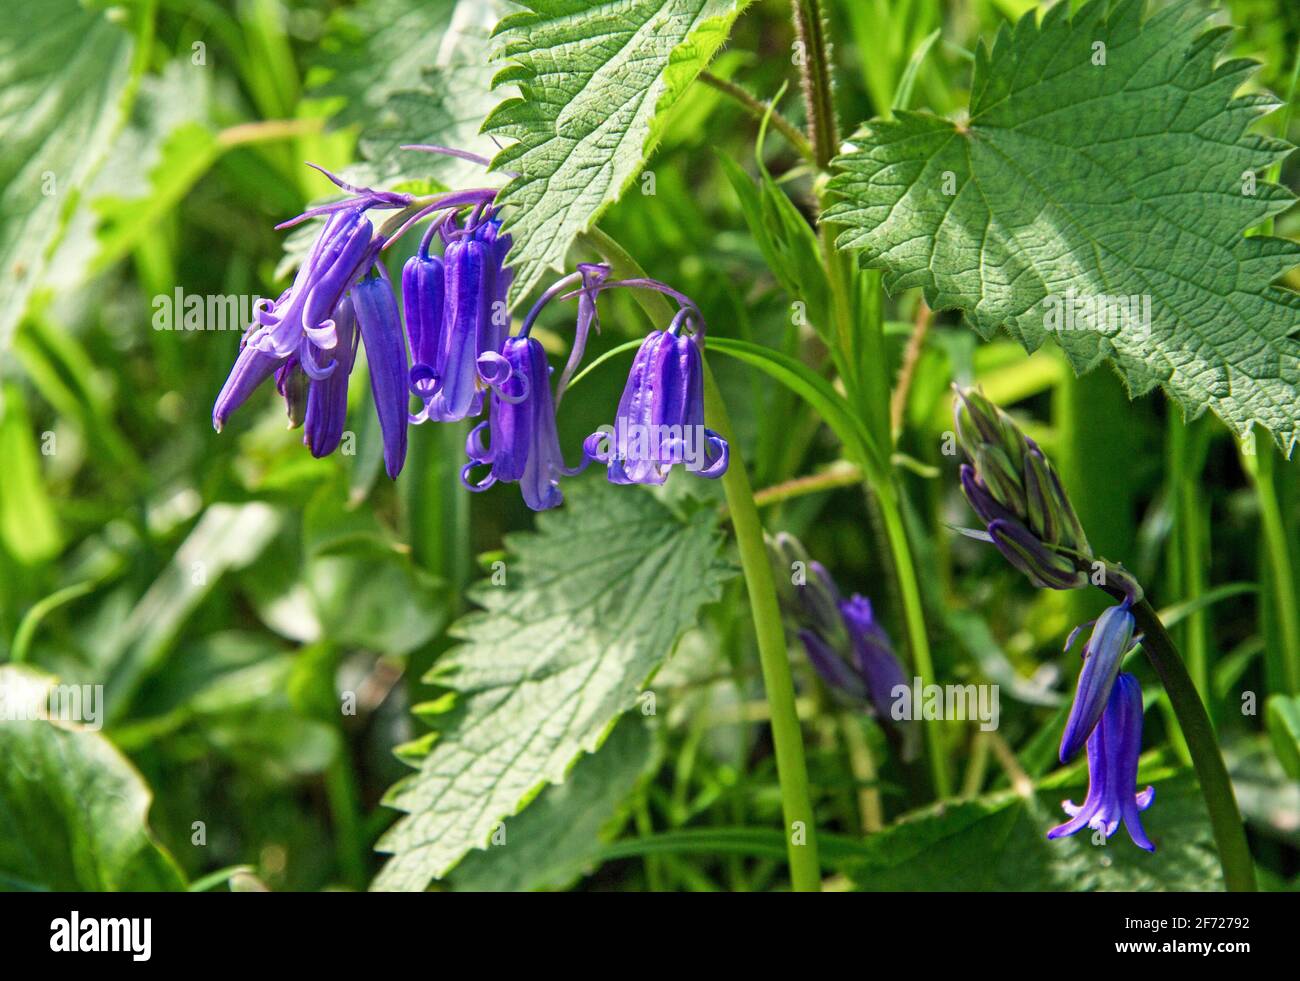 English Bluebells are native to England grow on just one side of the stem.  In hedgegrow at Slapton Ley in the South Hams, Devon Stock Photo